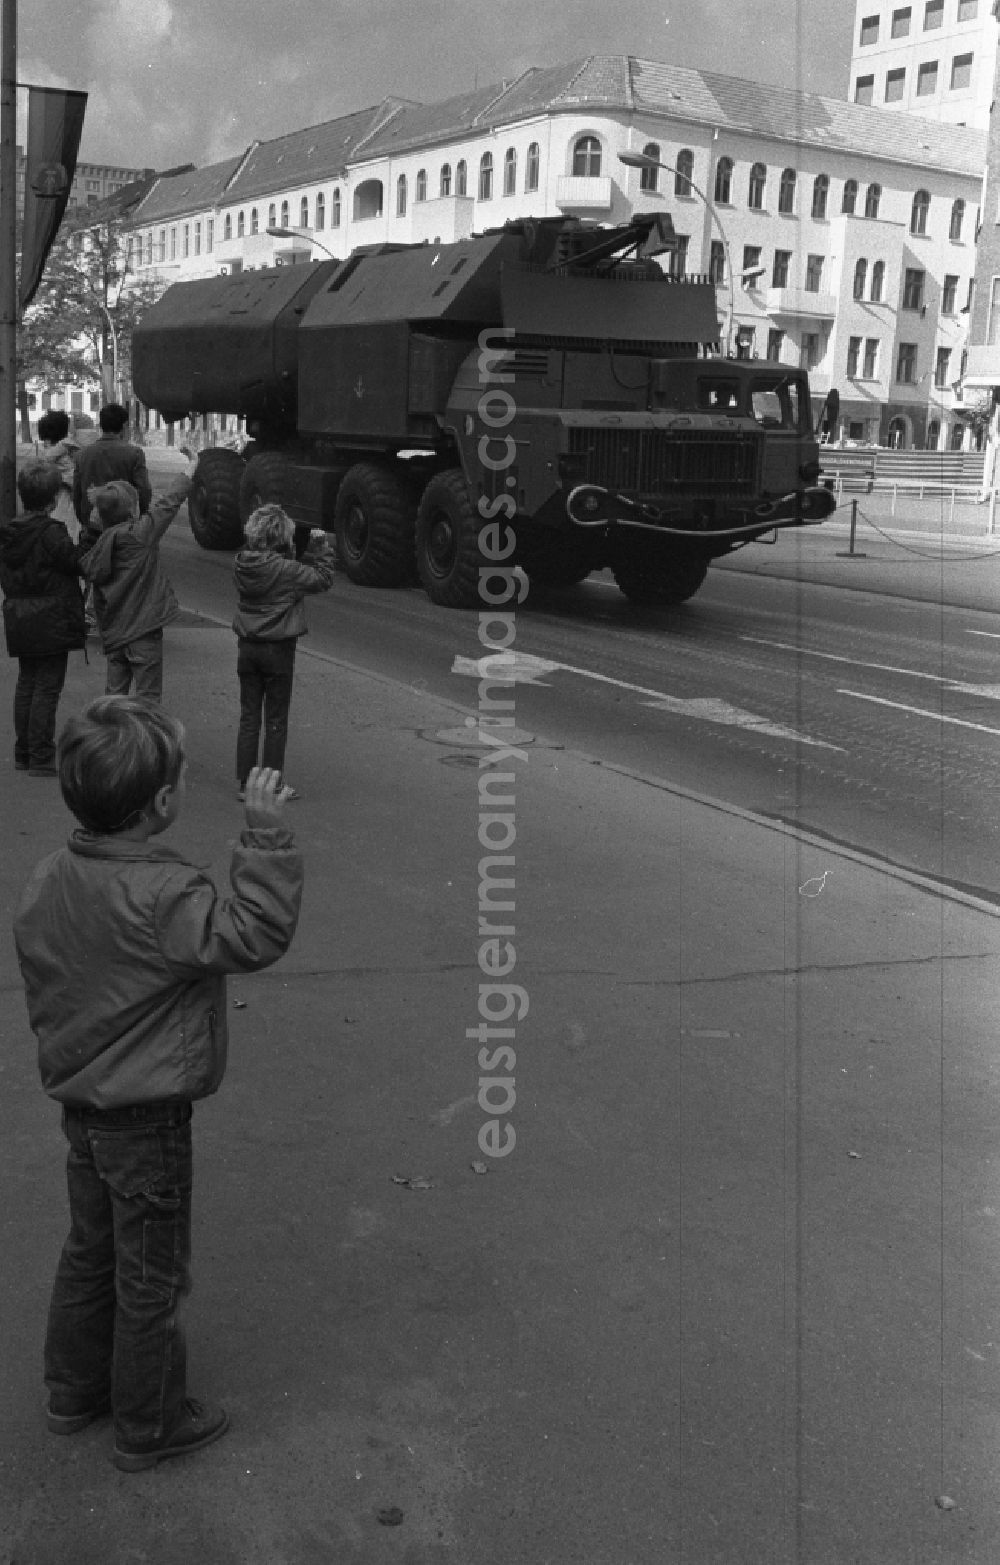 GDR picture archive: Berlin - Parade ride of military and combat technology of the FLA rocket troops of the NVA National People's Army for the national holiday on Karl-Marx-Allee in the district of Friedrichshain in Berlin East Berlin on the territory of the former GDR, German Democratic Republic